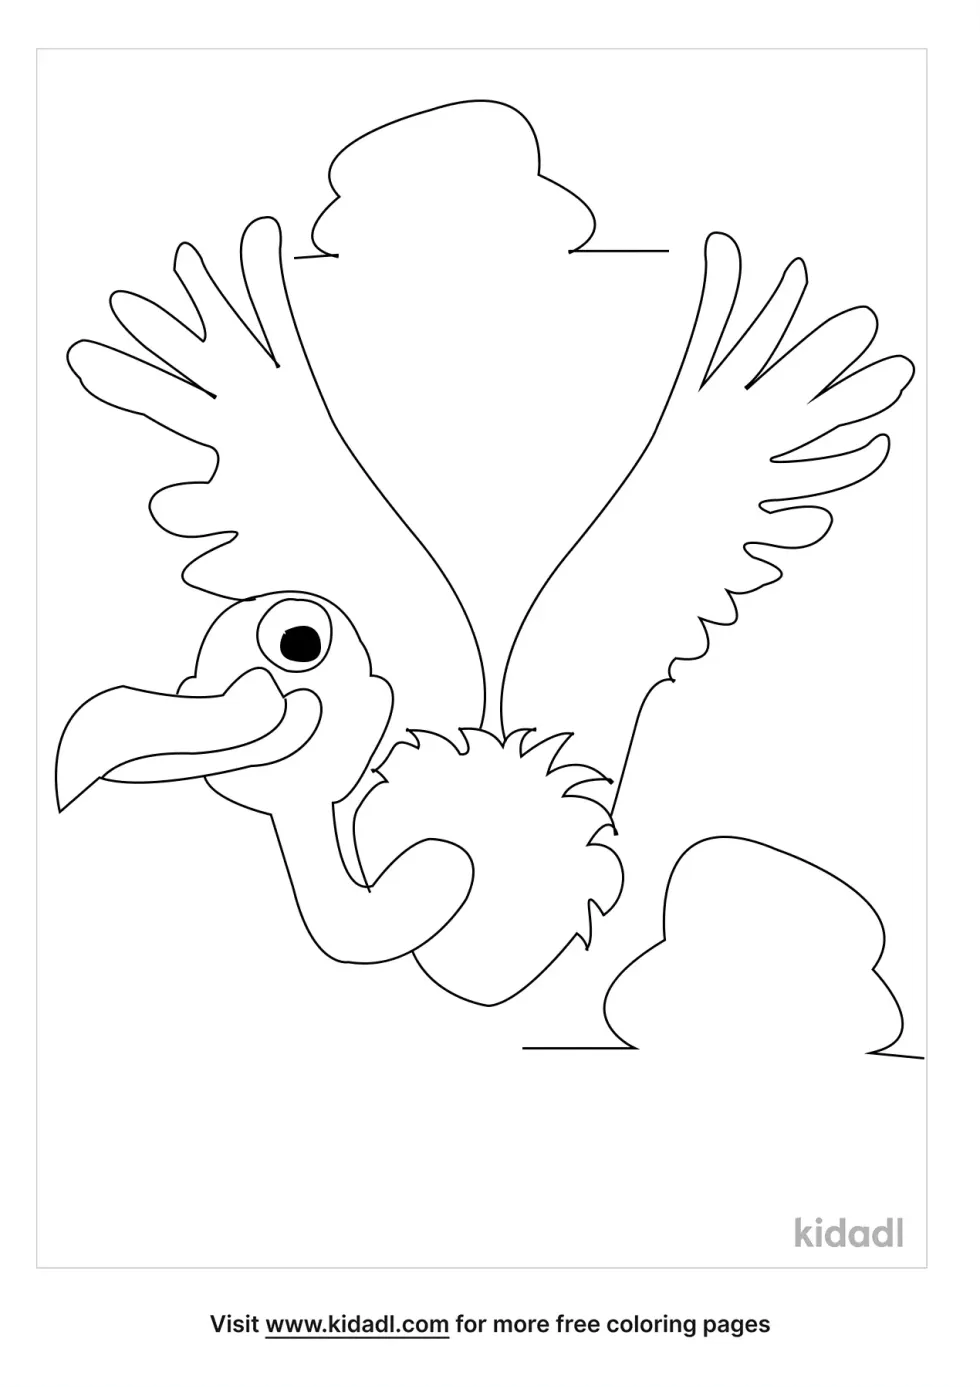 Flying Buzzard Coloring Page